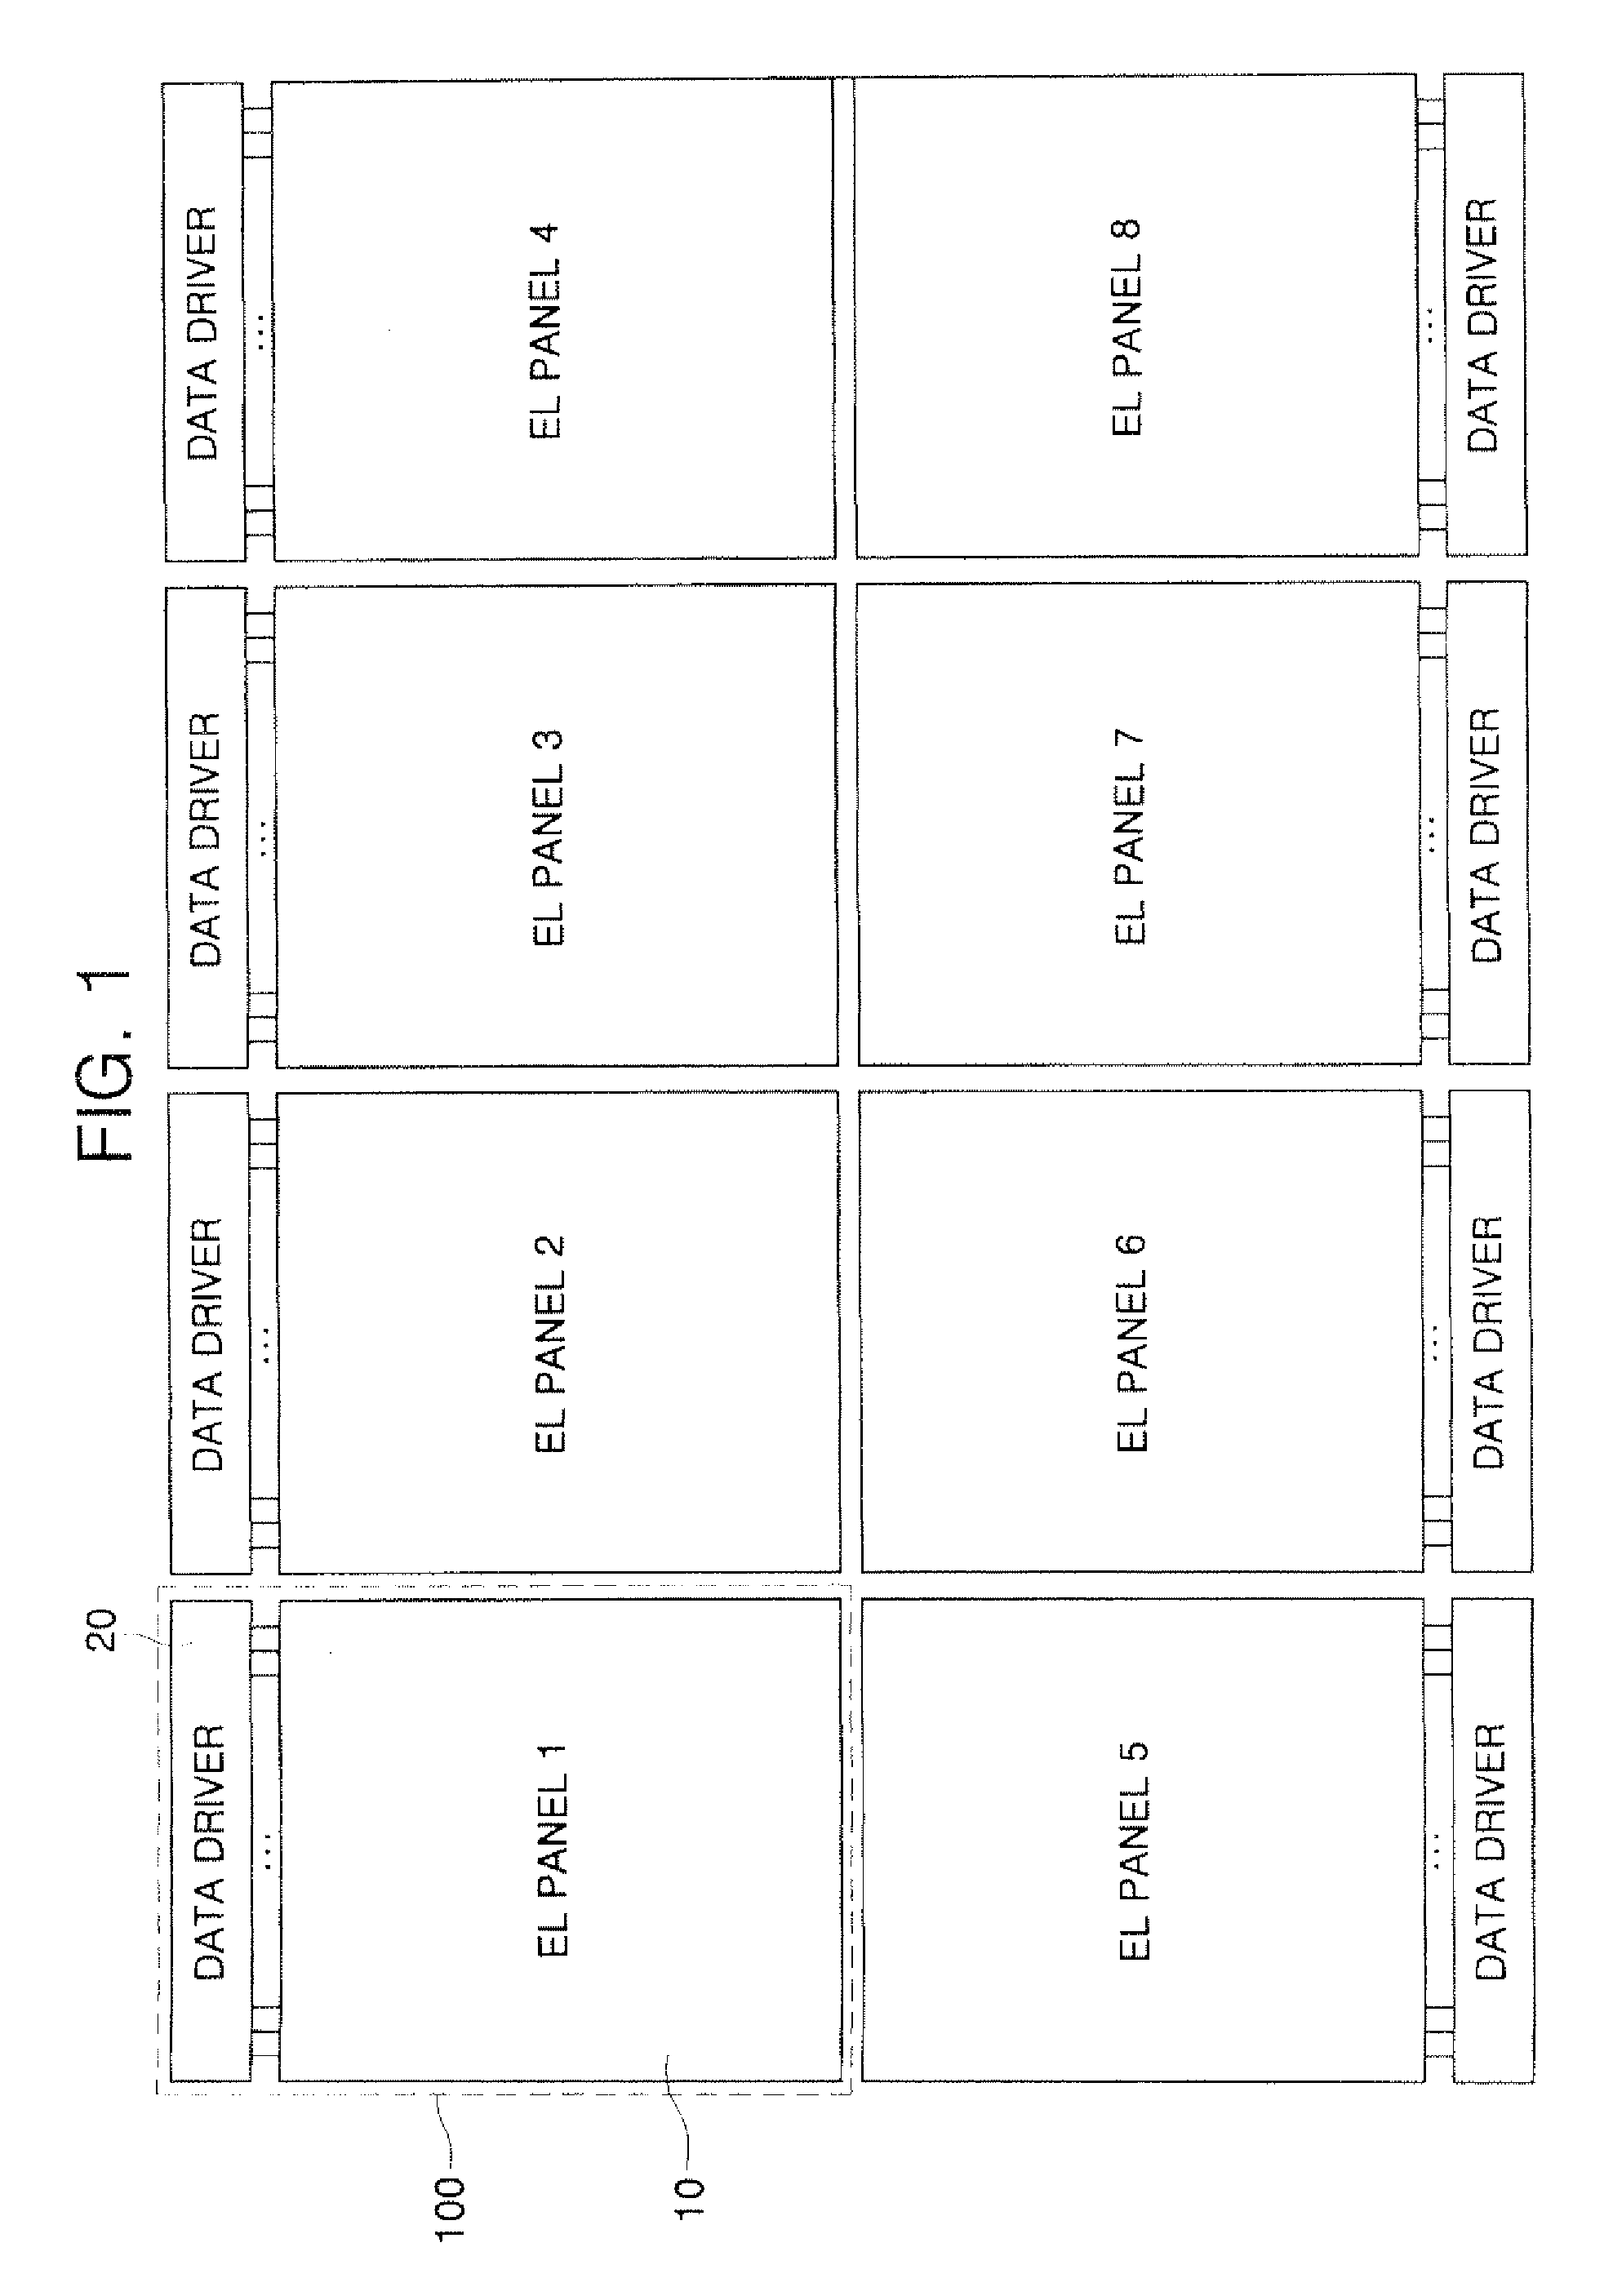 Emission control driver and organic light emitting display device having the same and a logical or circuit for an emission control driver for outputting an emission control signal